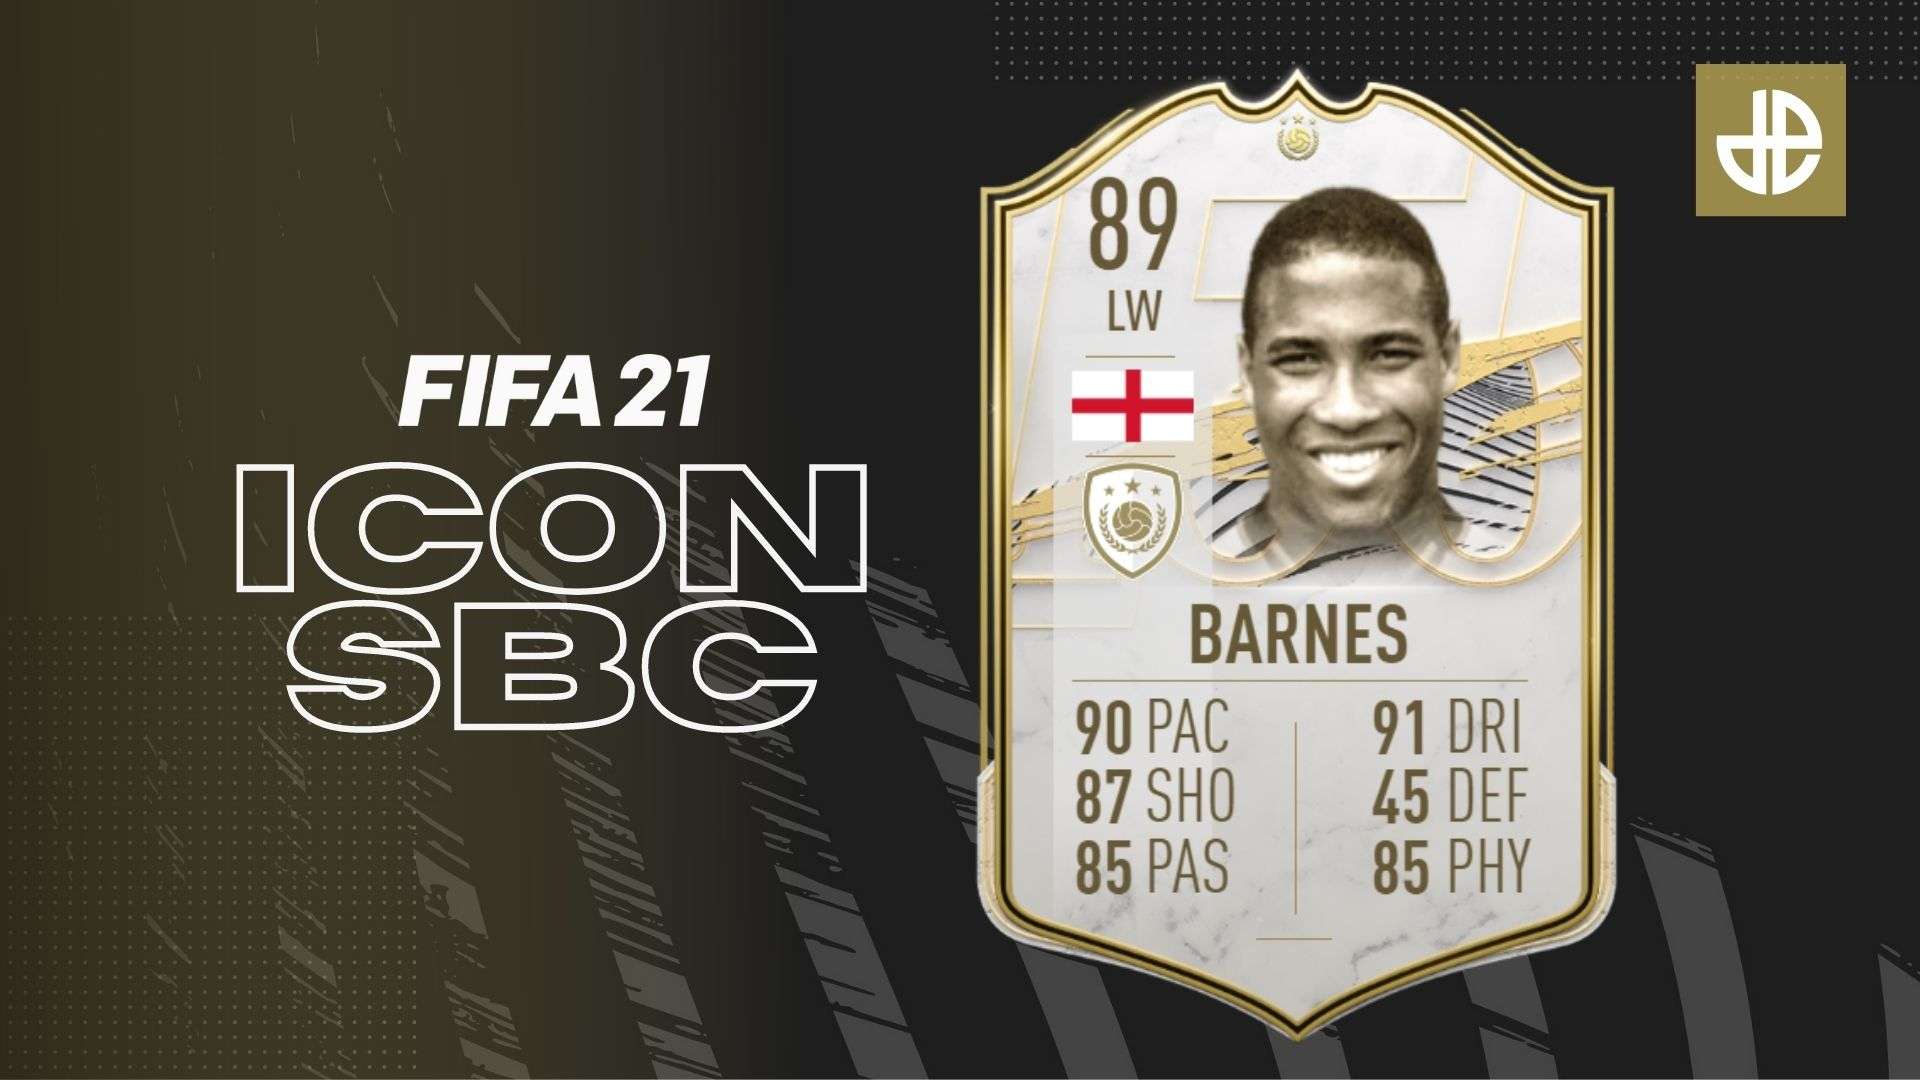 John Barnes 89-rated ICON SBC FIFA 21 Ultimate Team requirements cost.